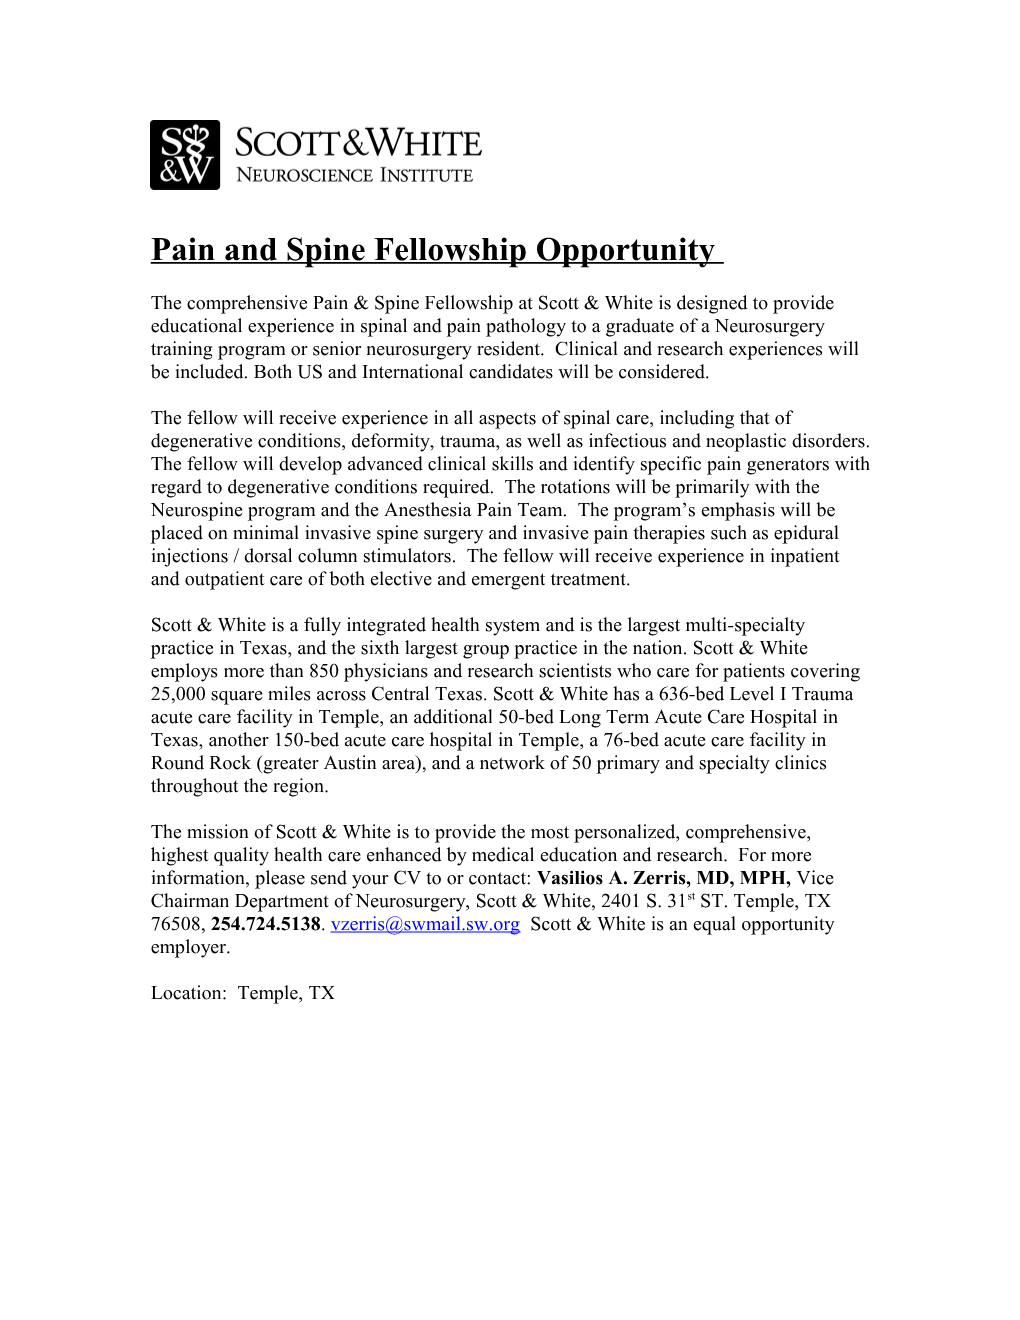 Pain and Spine Fellowship Opportunity